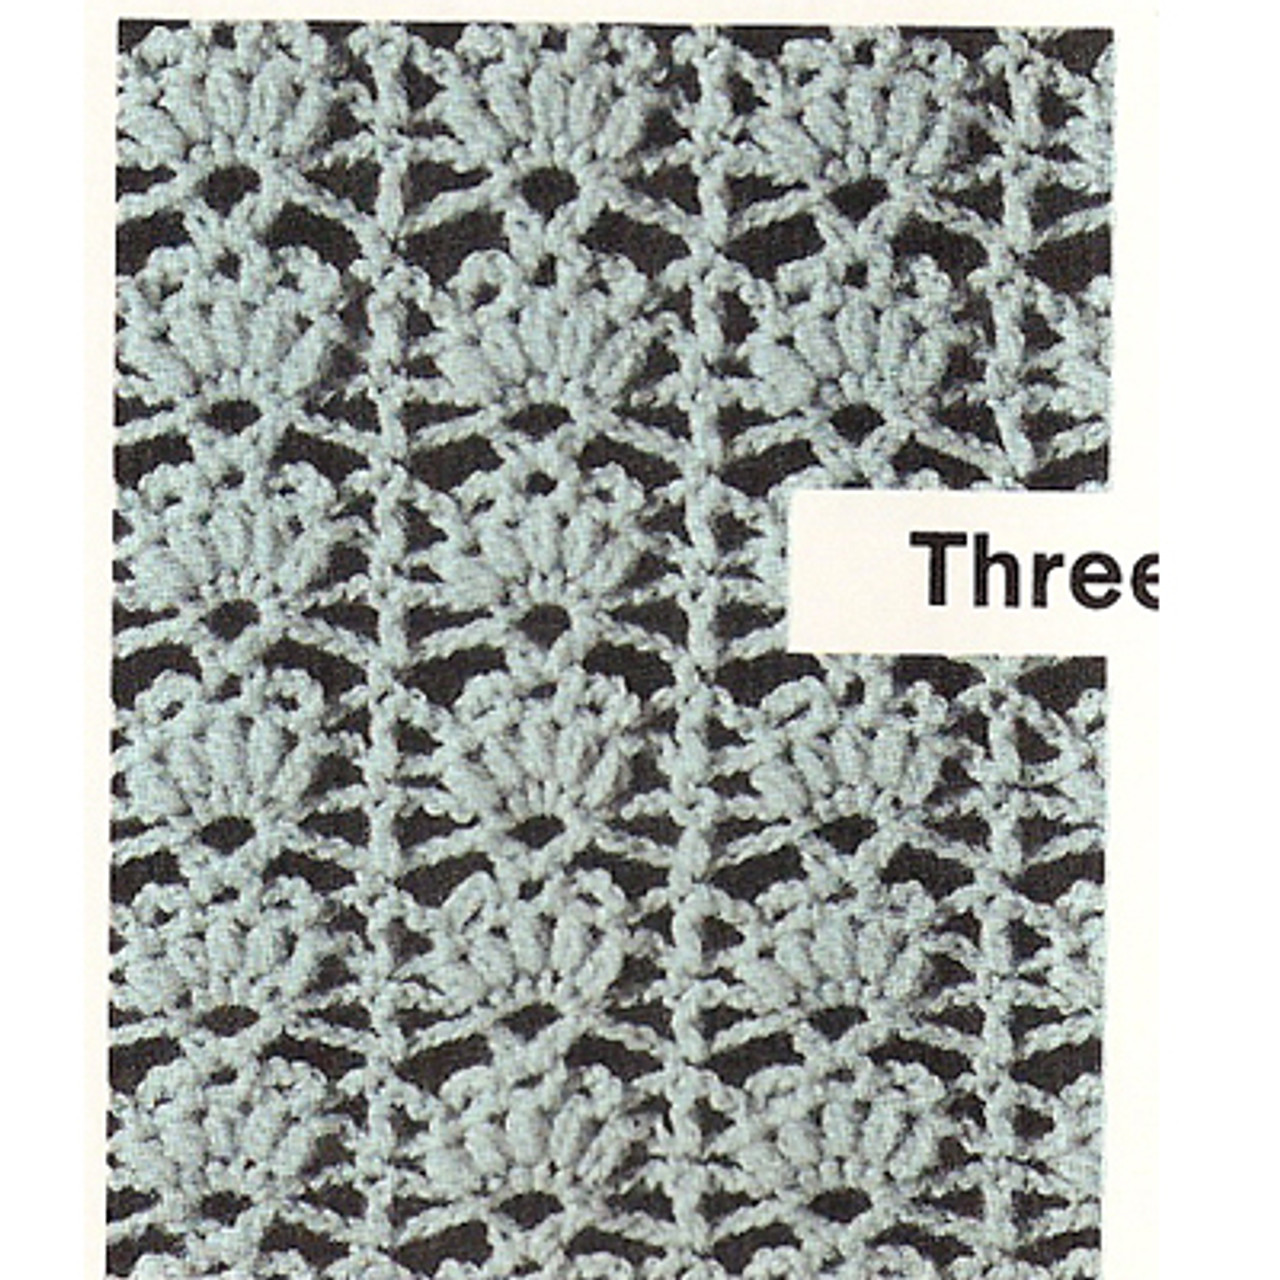 Crochet Shell Stitch Illustration for top 